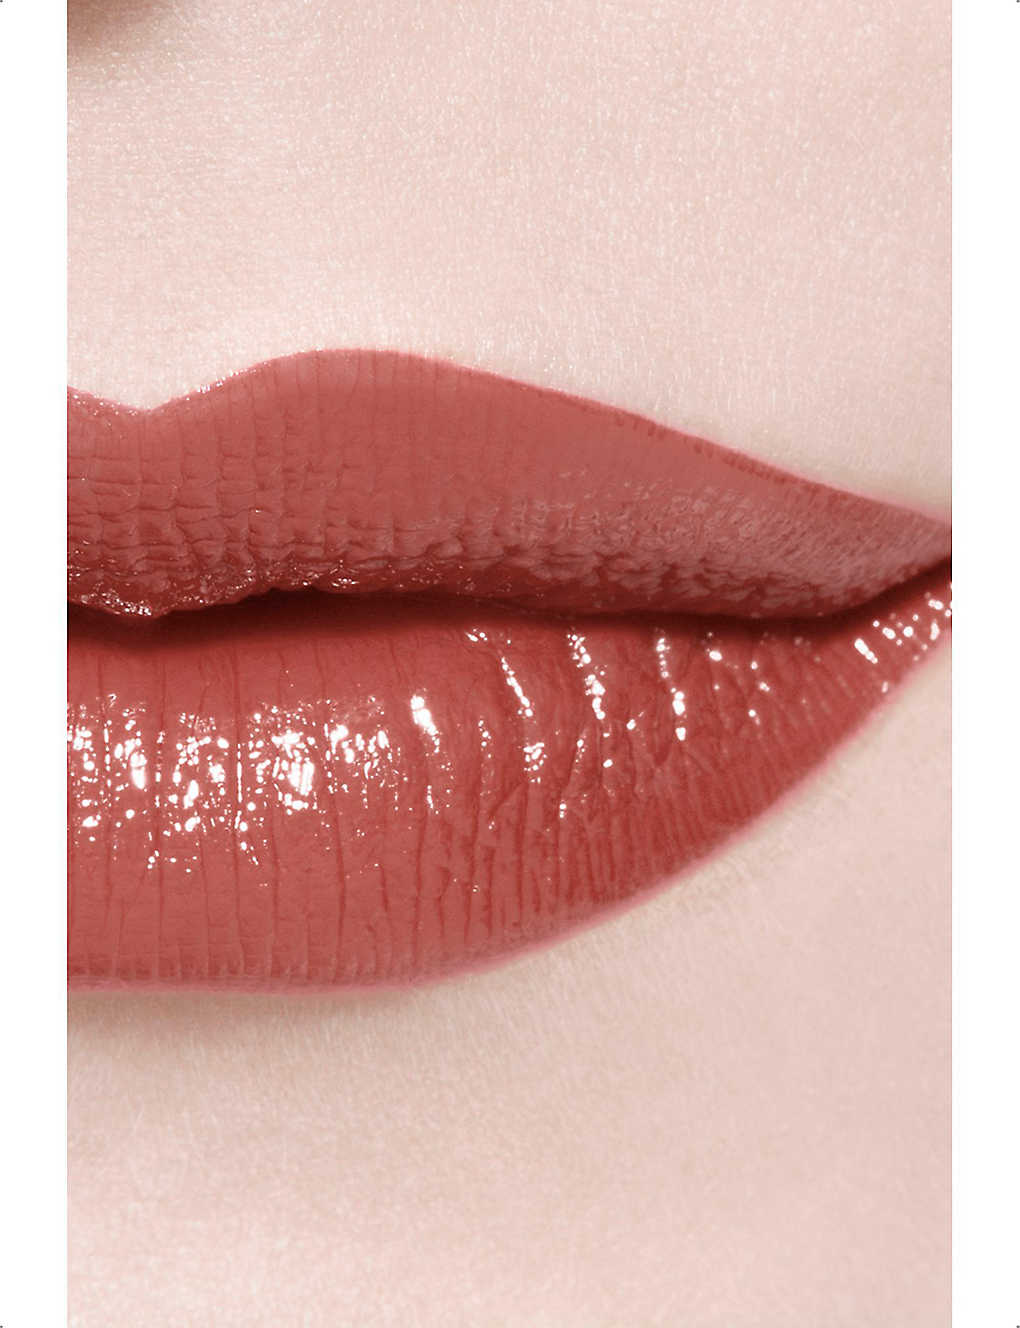 CHANEL
ROUGE COCO BLOOM
Hydrating And Plumping Lipstick 3g